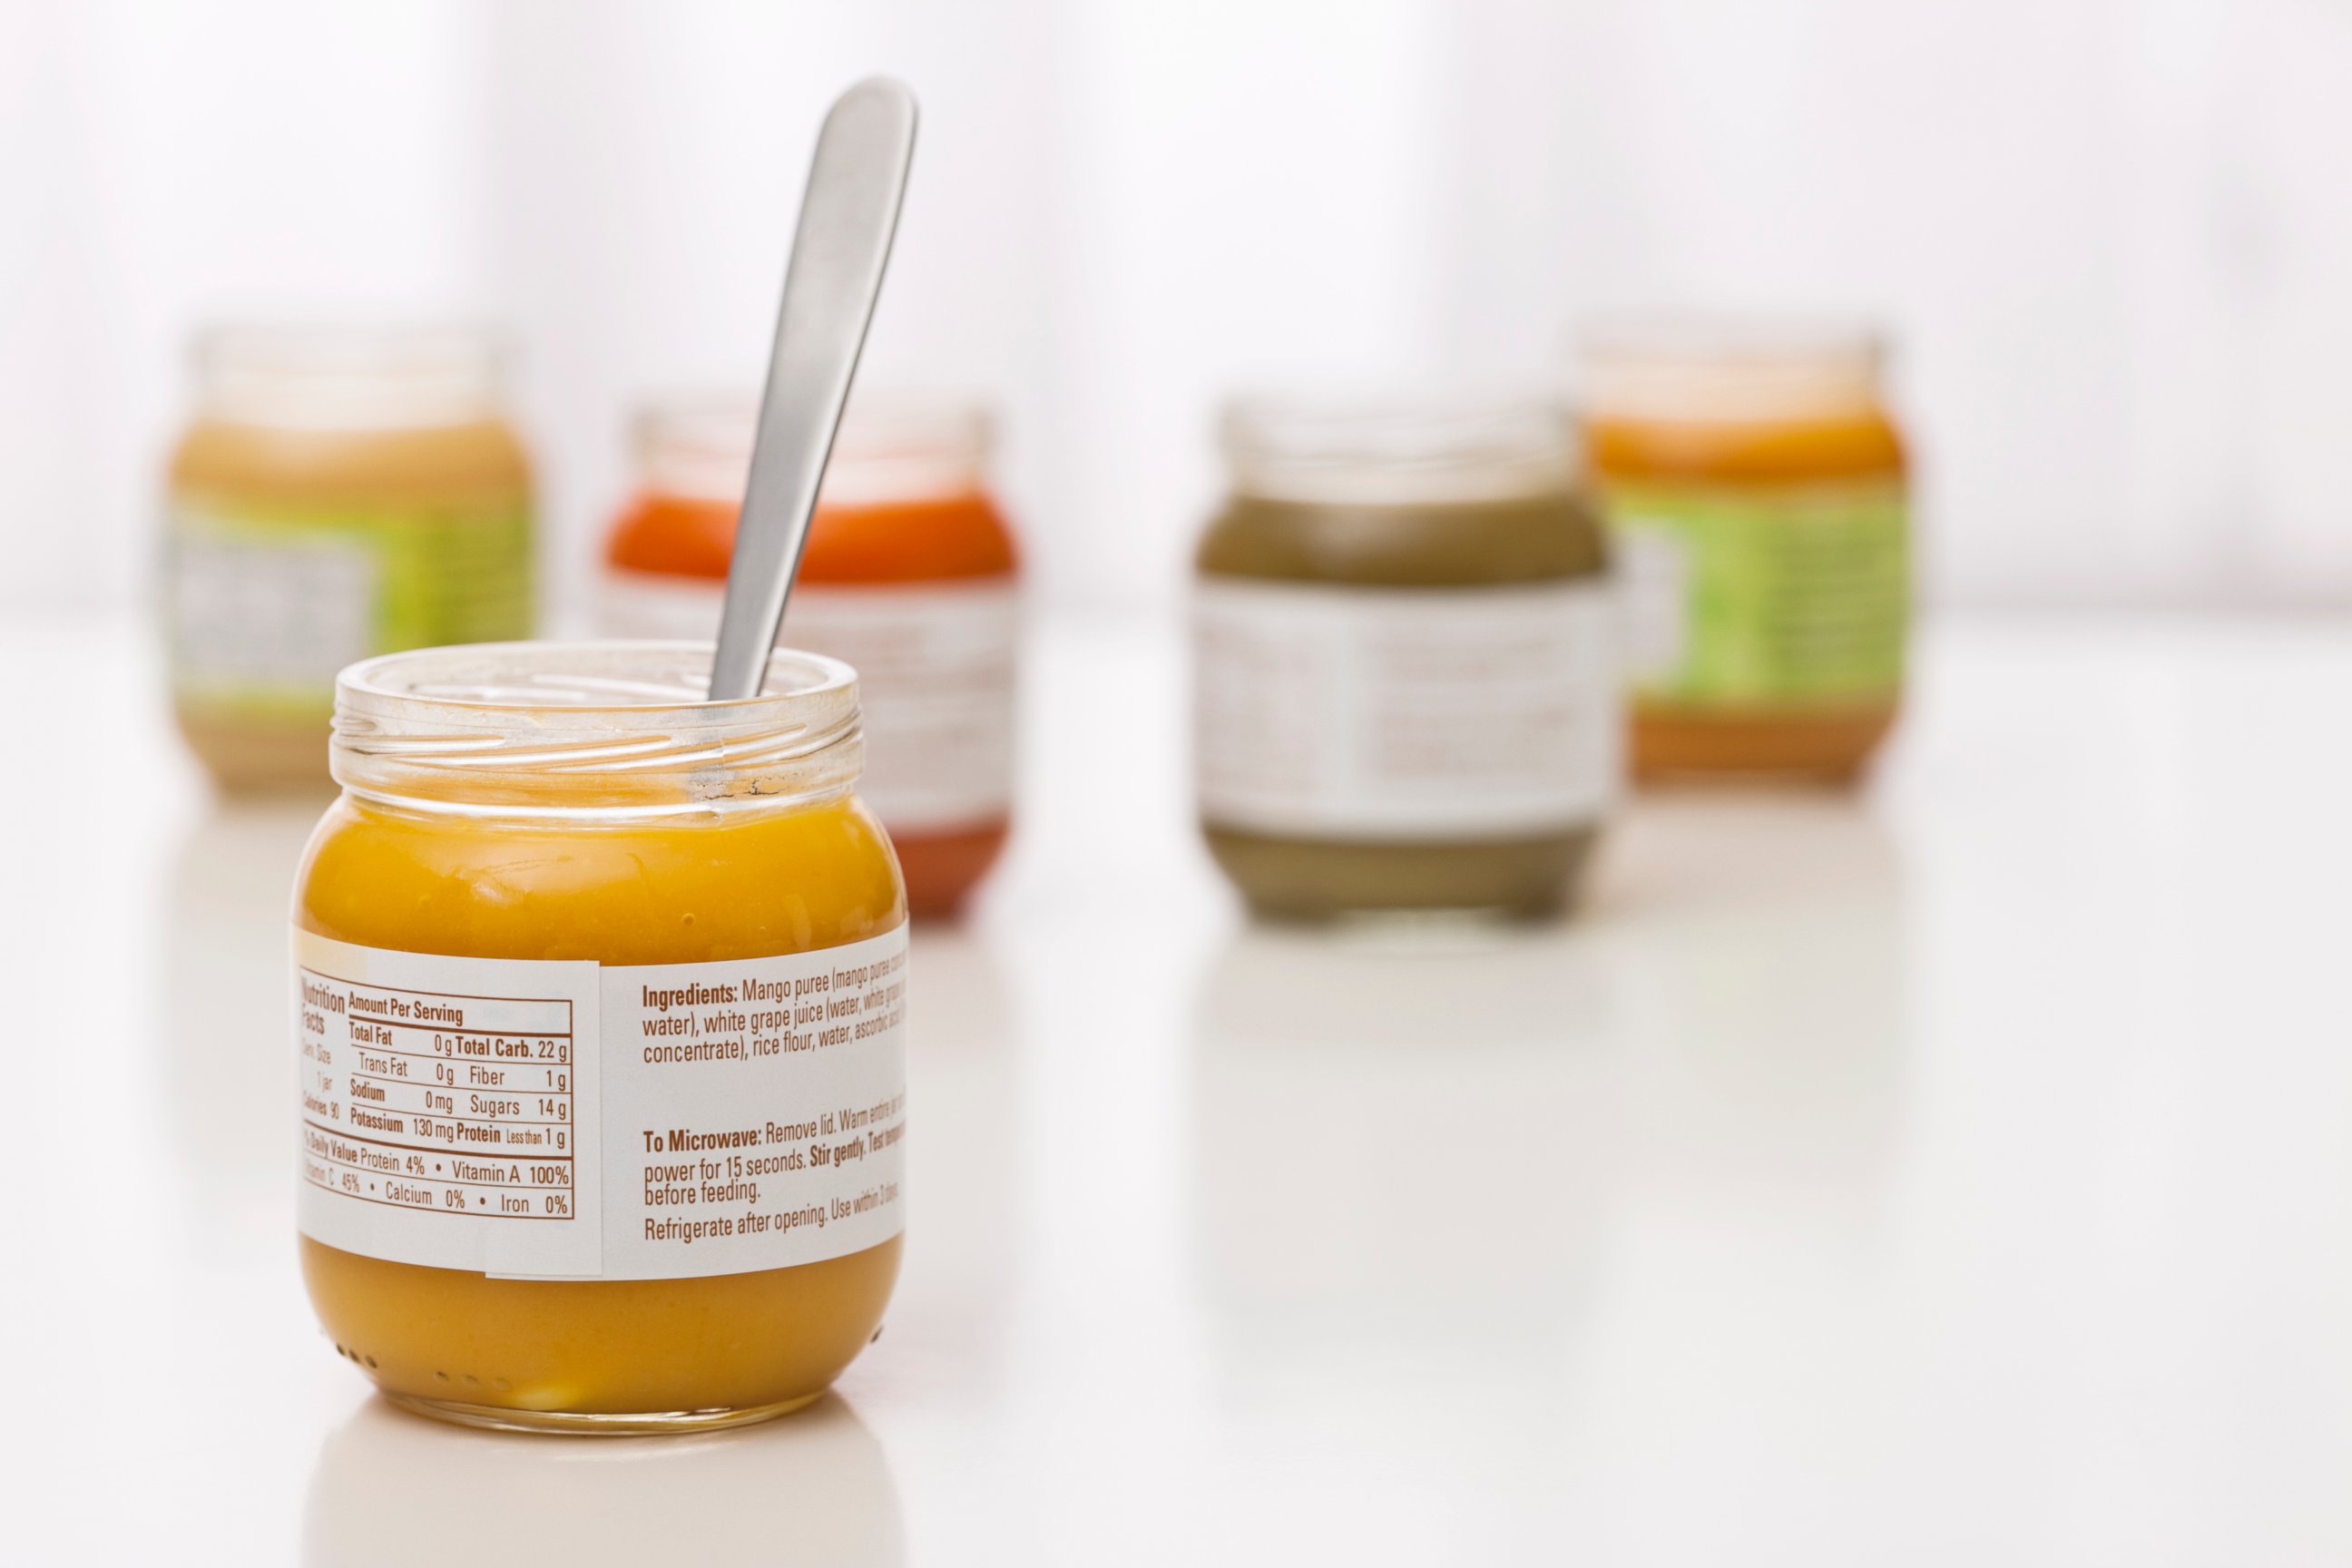 PHOTO: Jars of baby food are seen here.